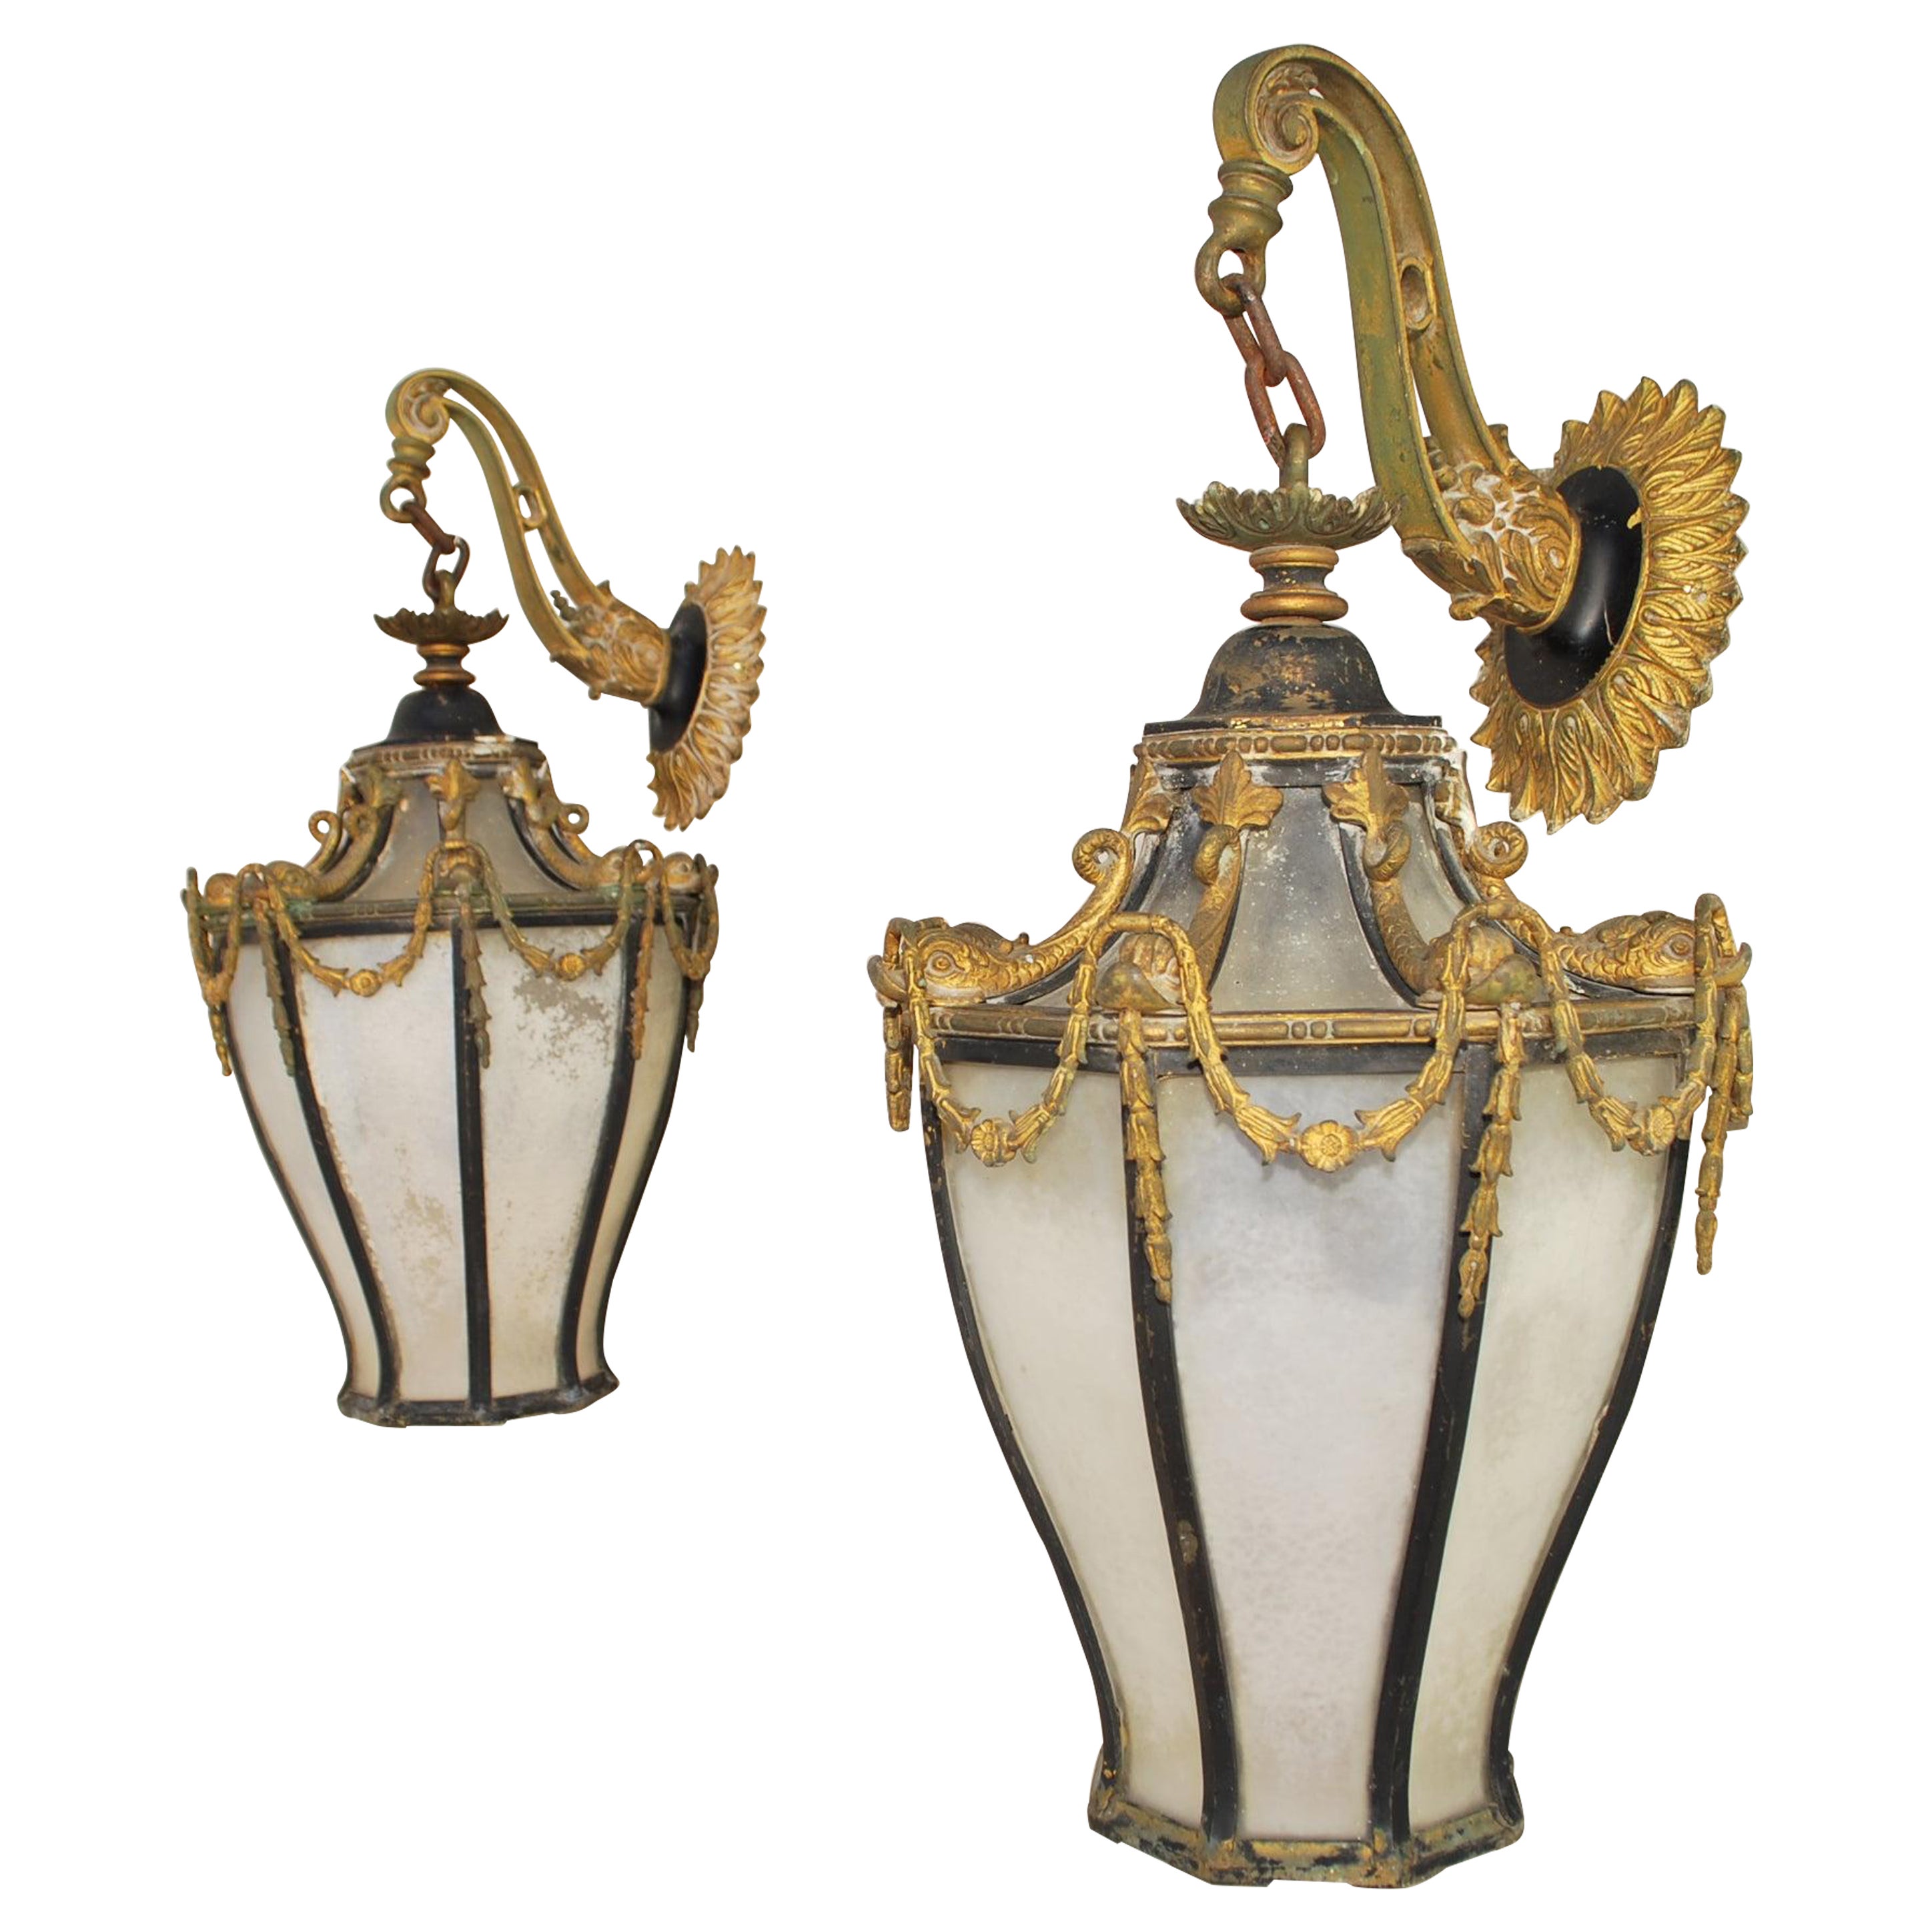 Very rare Pair of French turn of the century bronze outdoor/indoor sconces